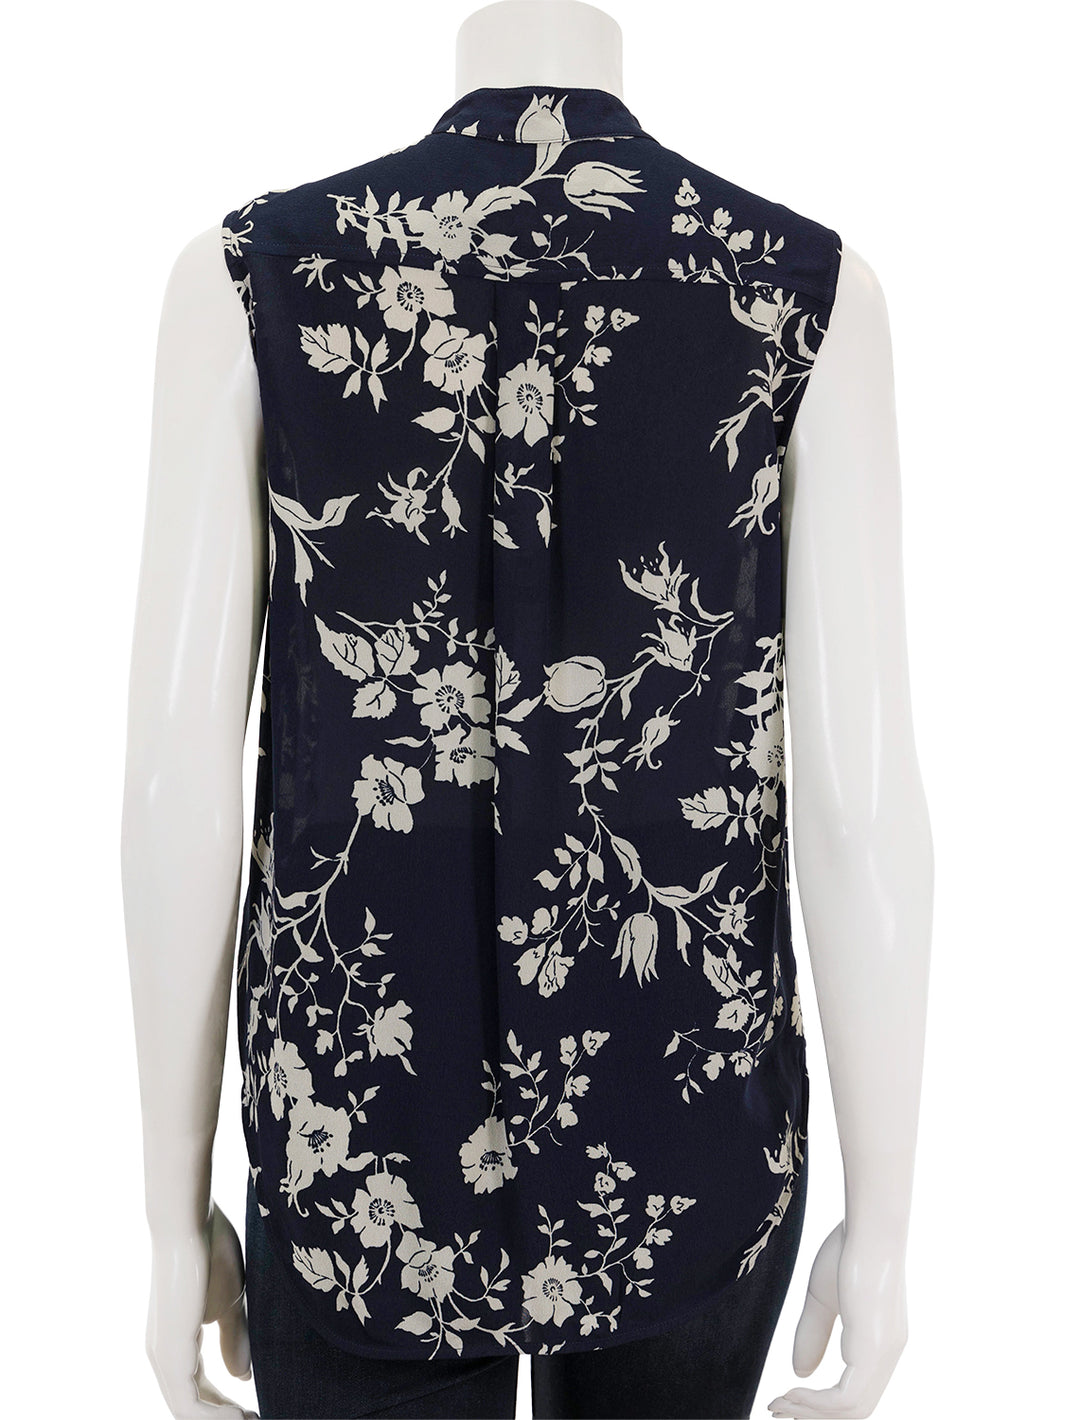 Back view of Rag & Bone's meredith floral top in blue multi floral.